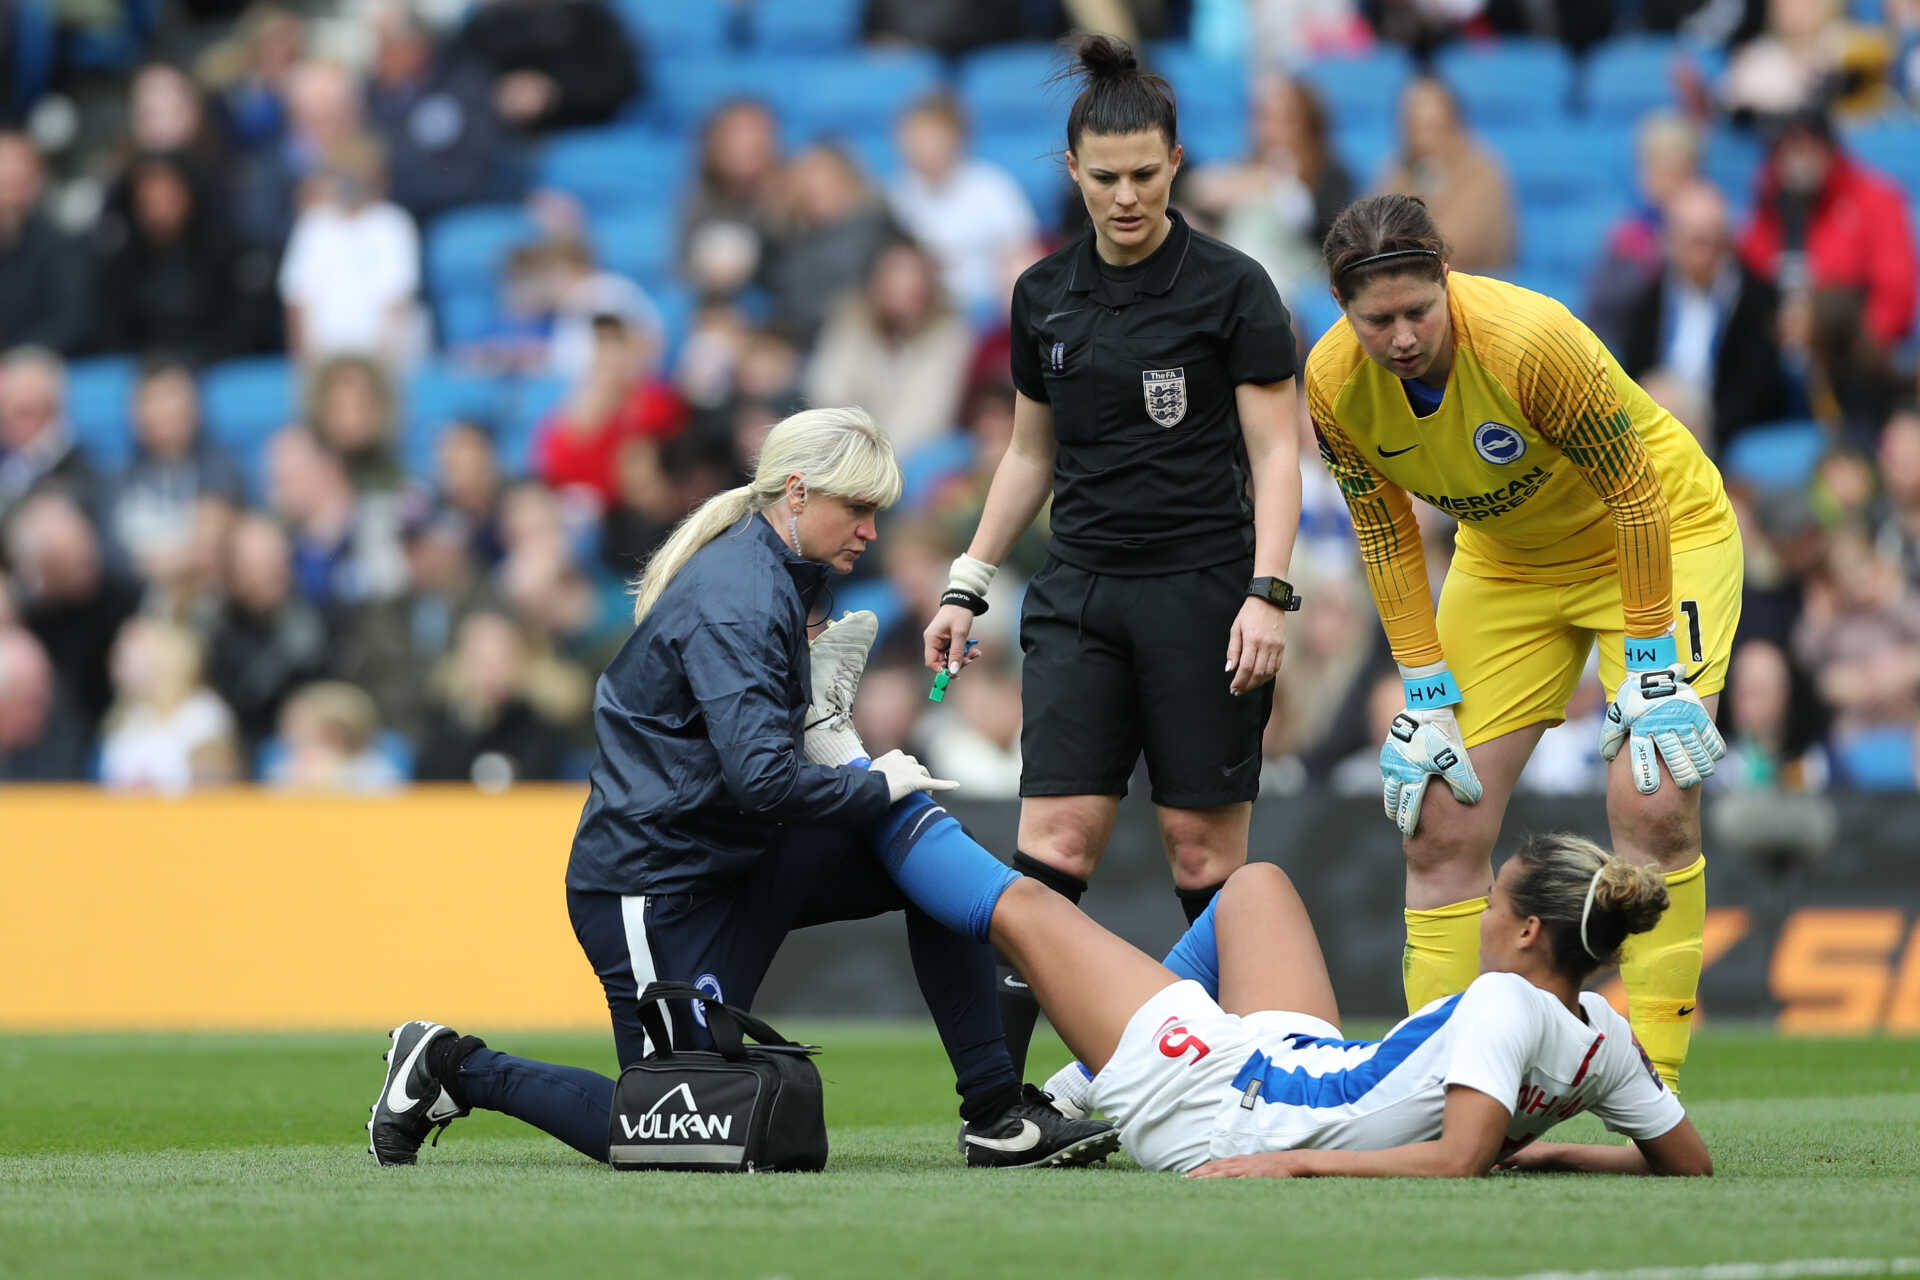 Lisa Walsh tends an injured footballer on the pitch